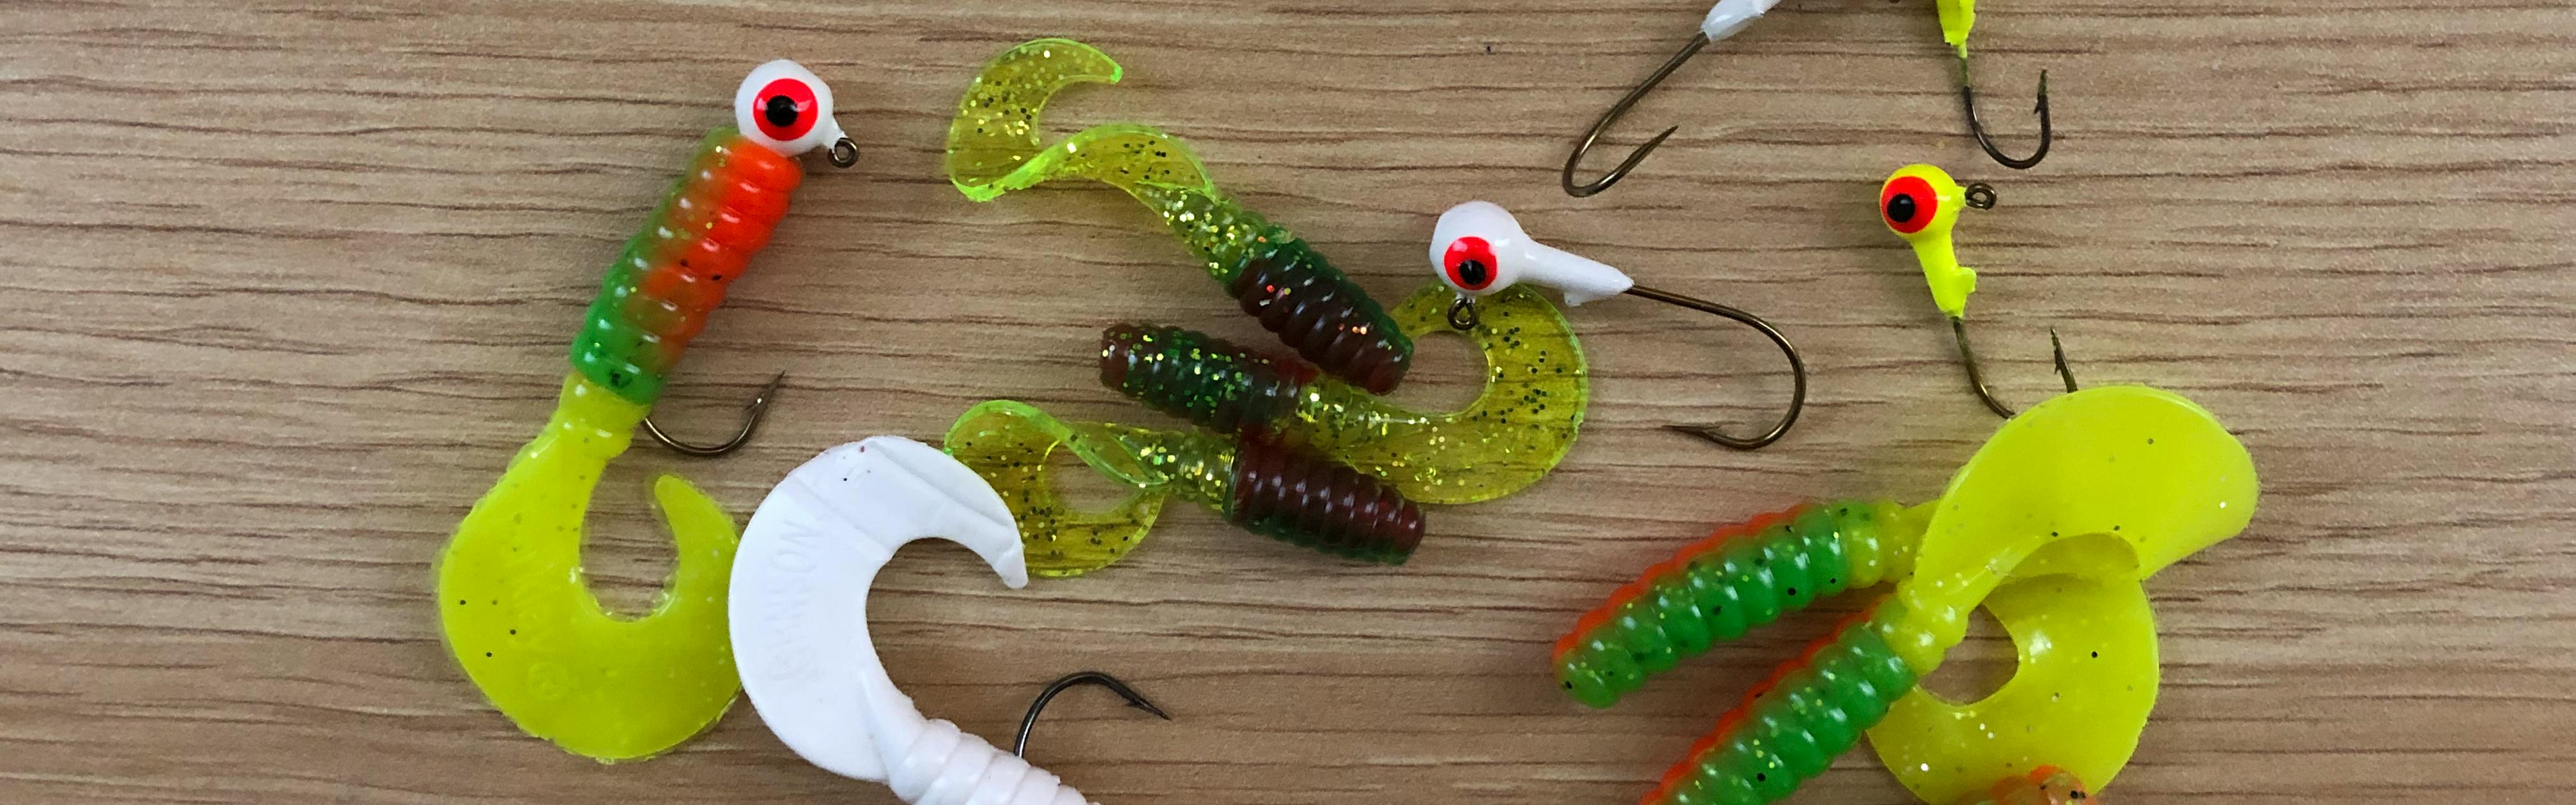 A  GREEN AND WHITE JUNE BUG  FOR A NEW LOOK BASS LURE ! CRAFTED BY HAND 